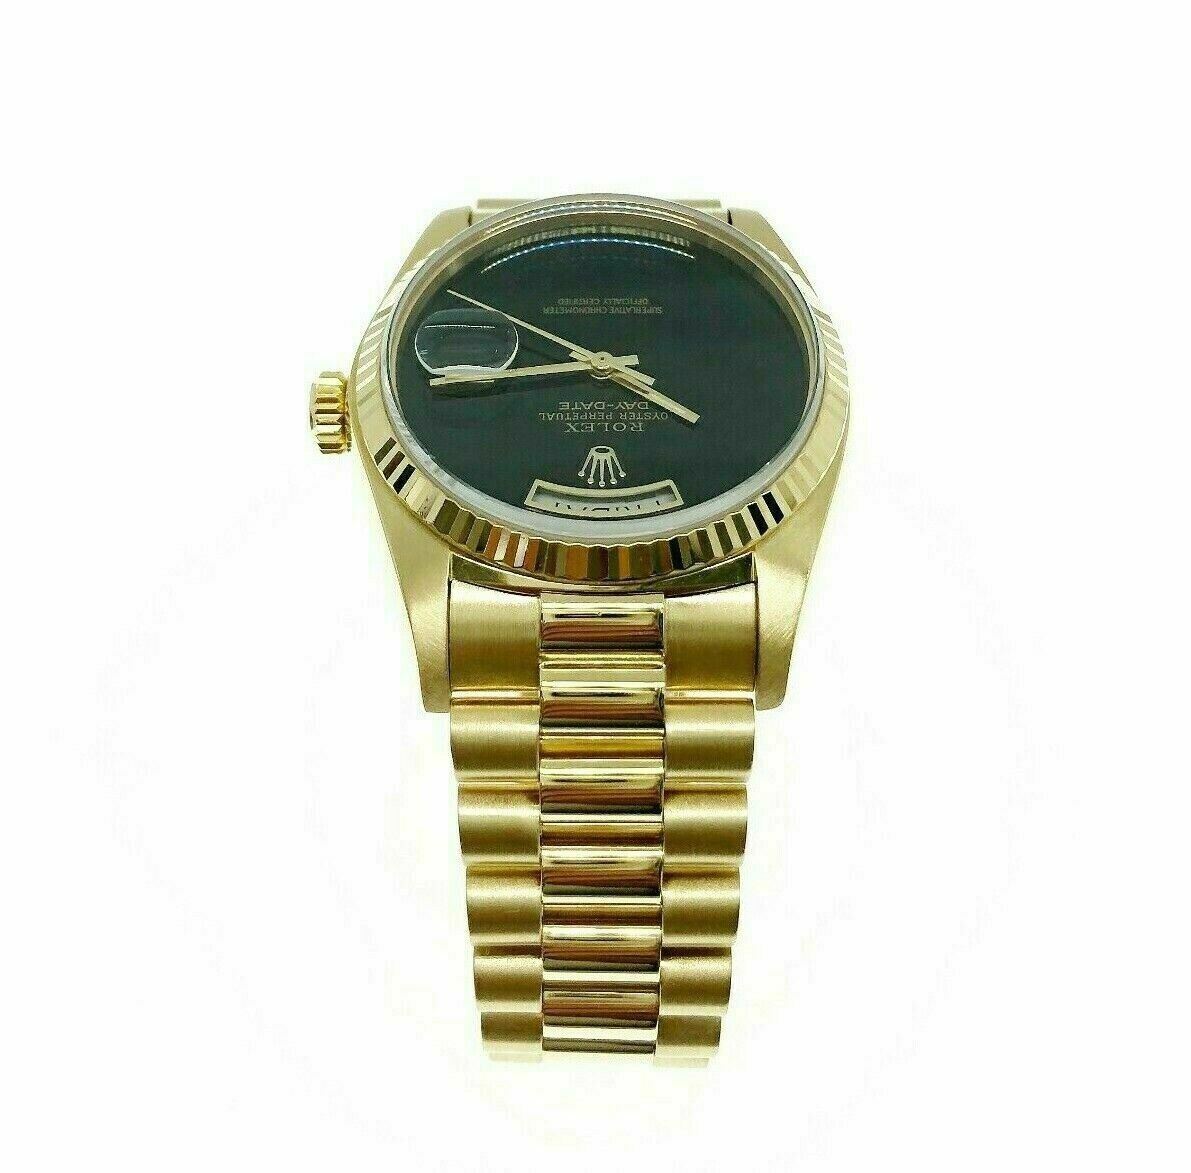 Rolex Day Date 18K President 36mm Watch 18038 Vintage 1980's with Onyx Dial